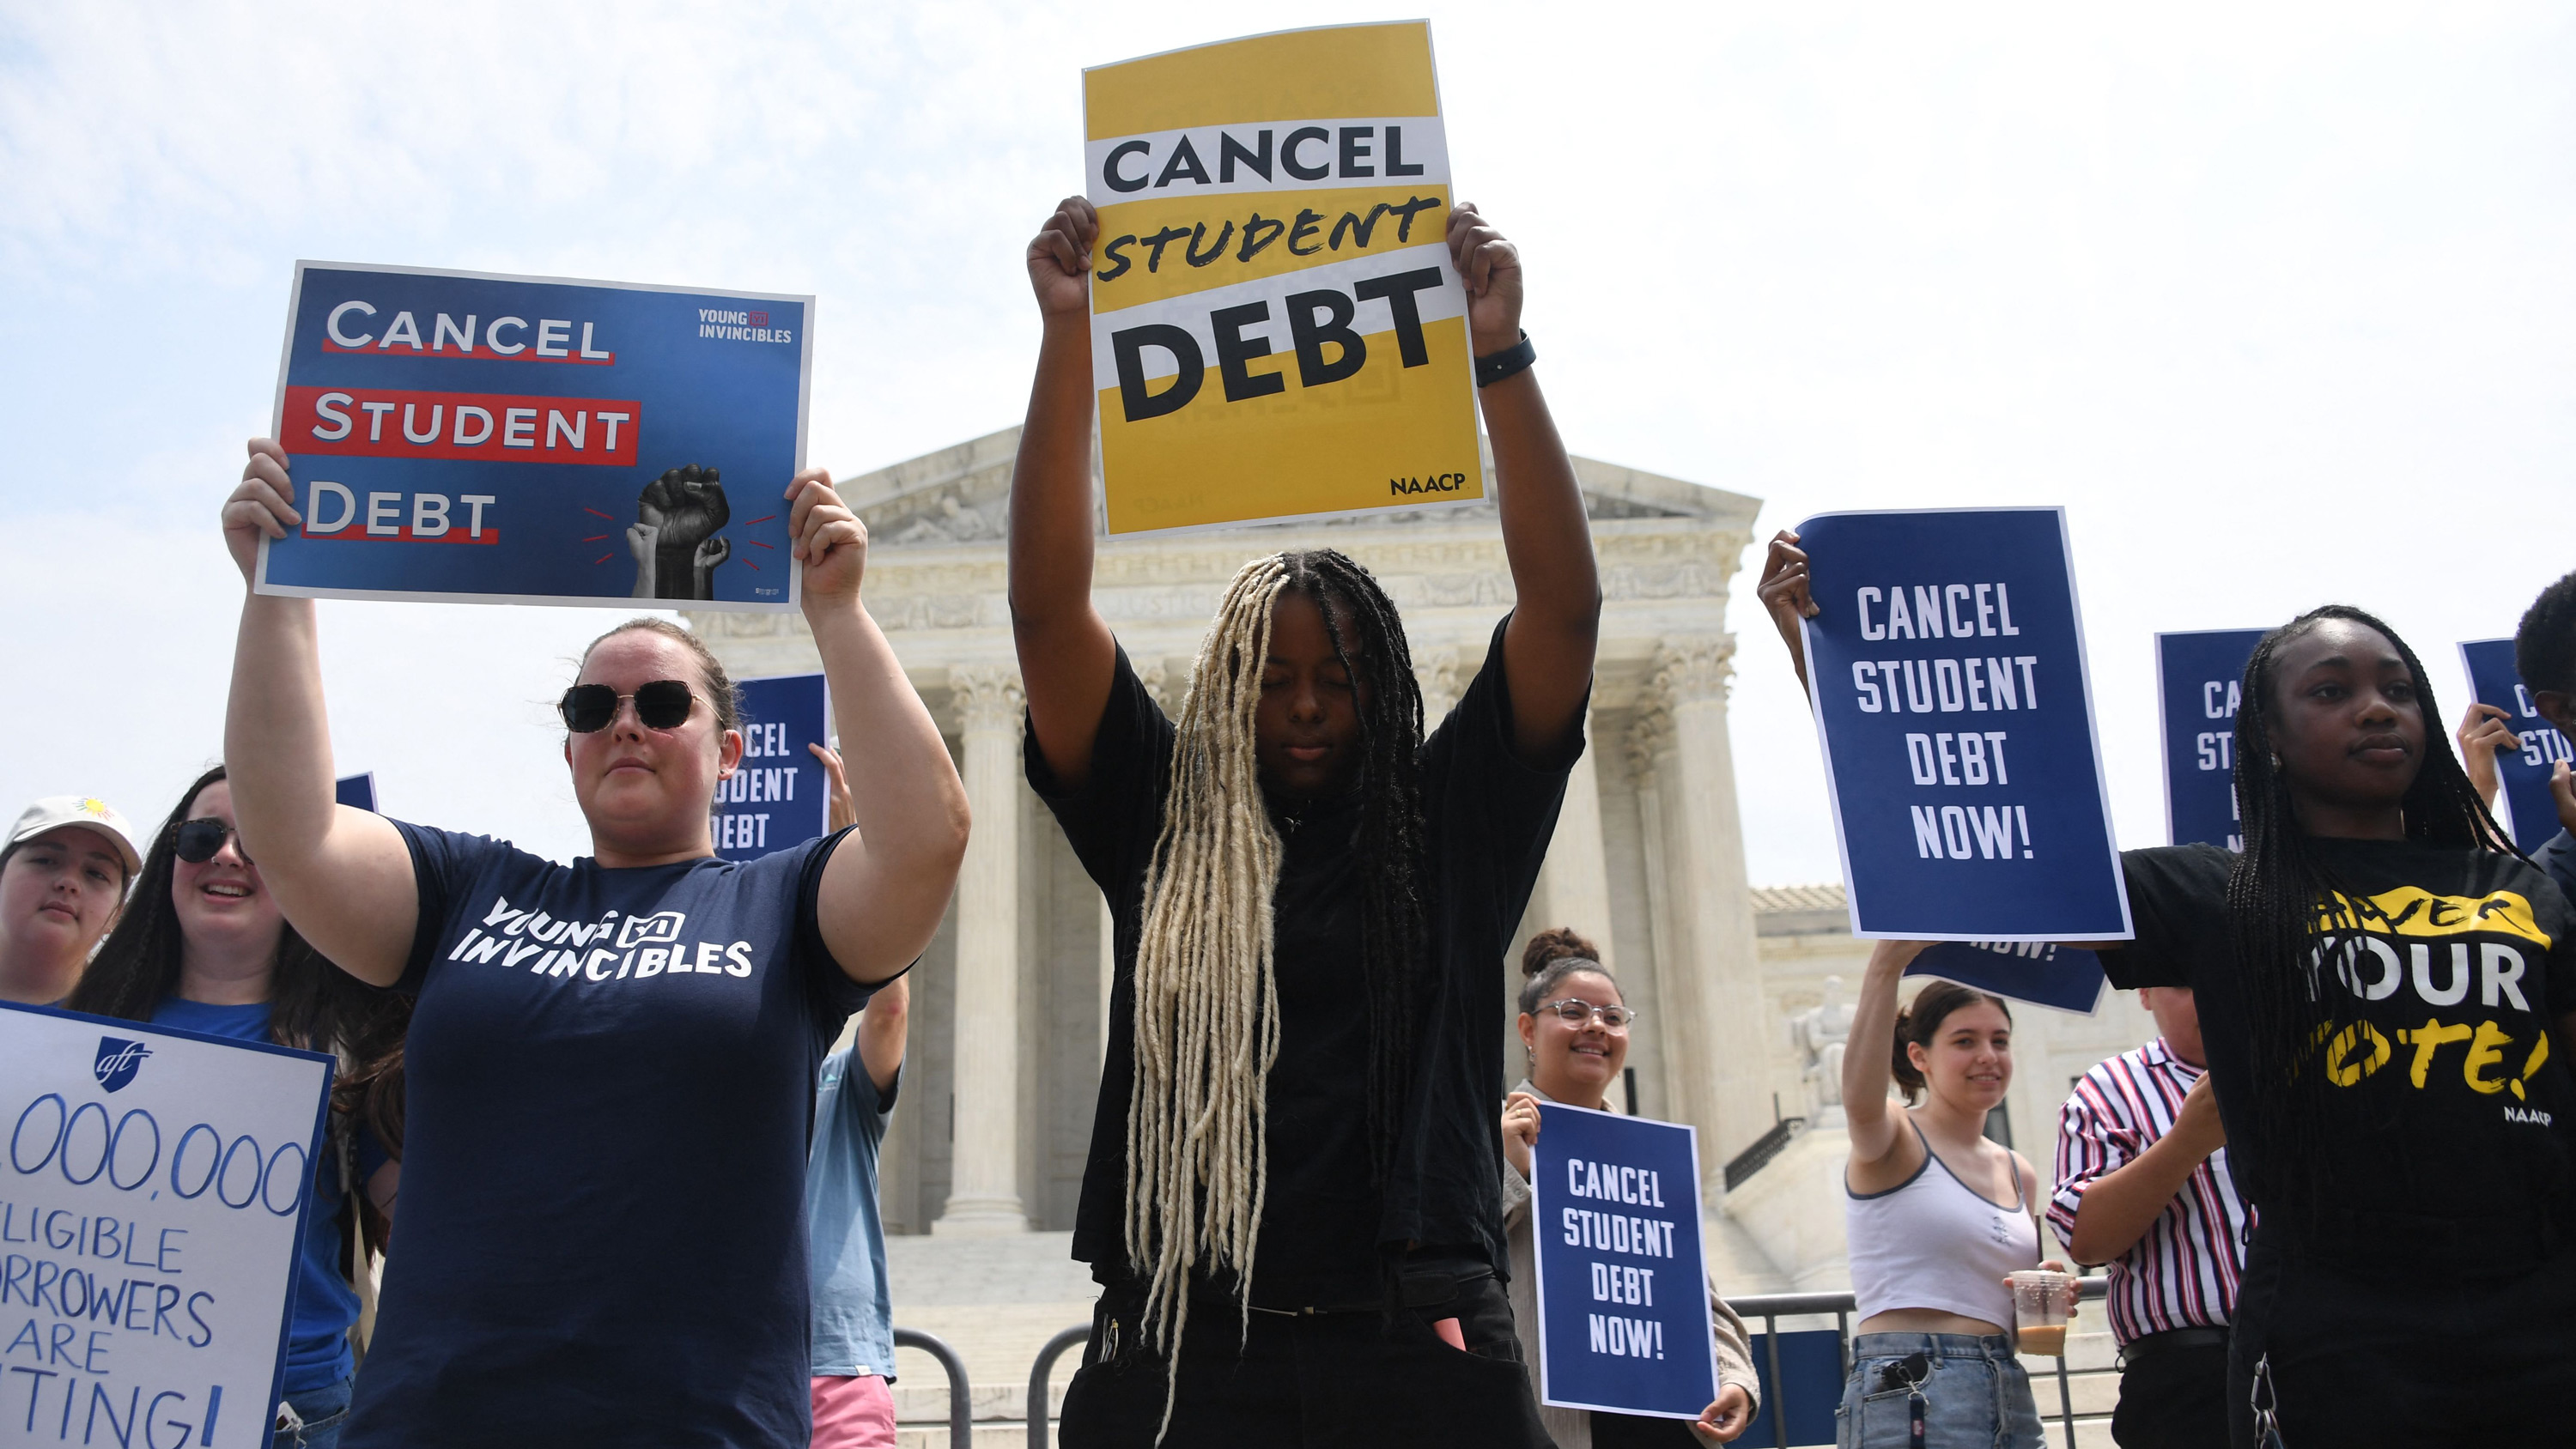 Supporters of student debt forgiveness demonstrate outside the US Supreme Court on June 30 in Washington, DC.